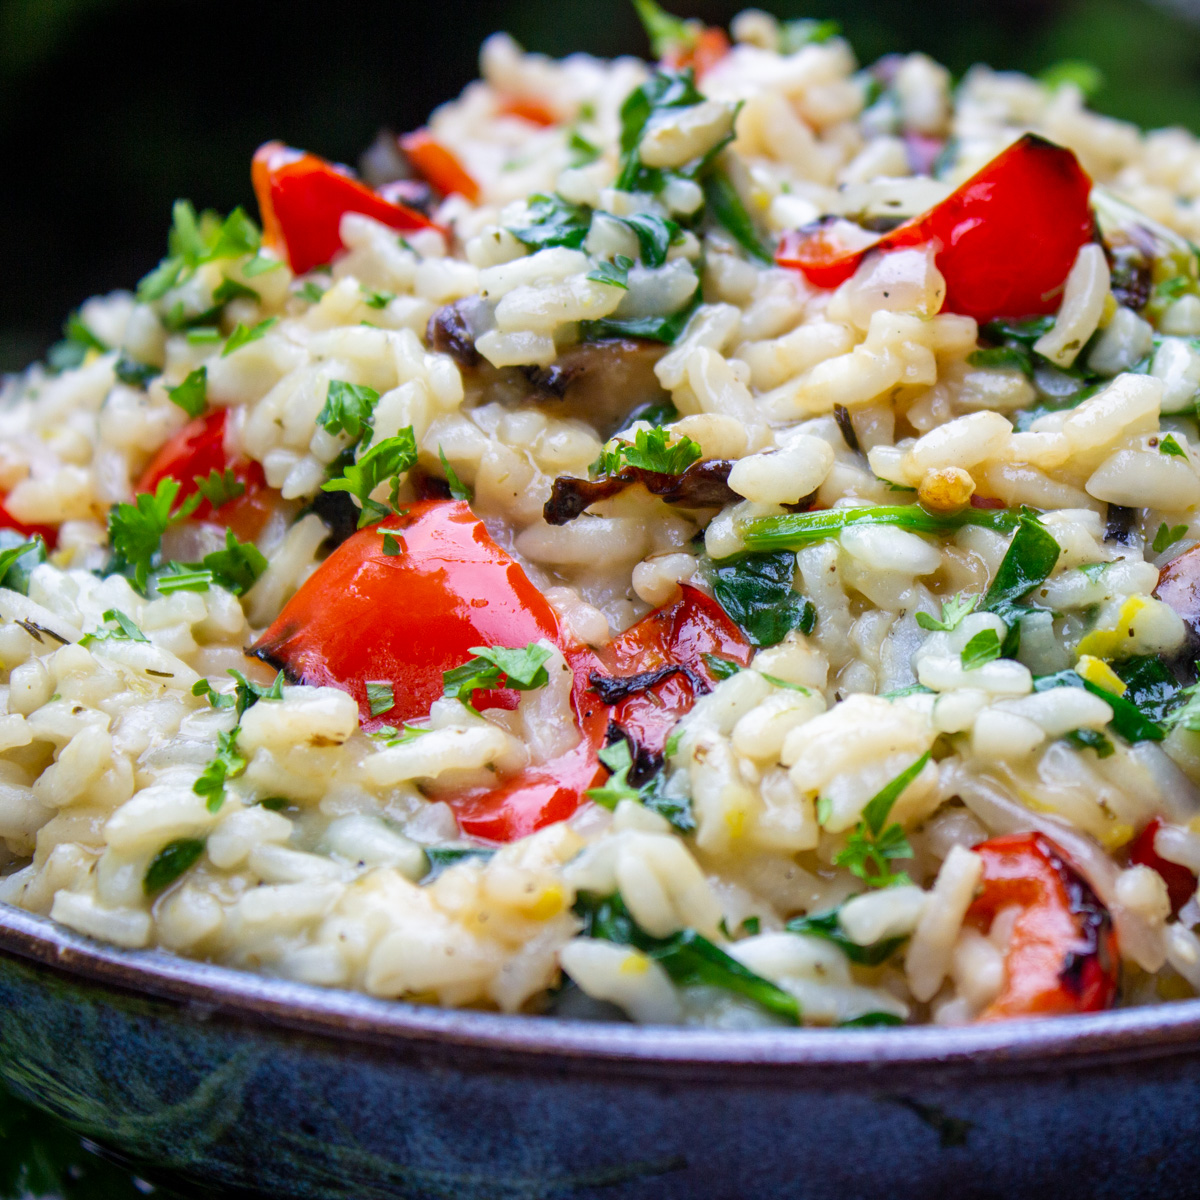 risotto with grilled vegetables in a bowl.